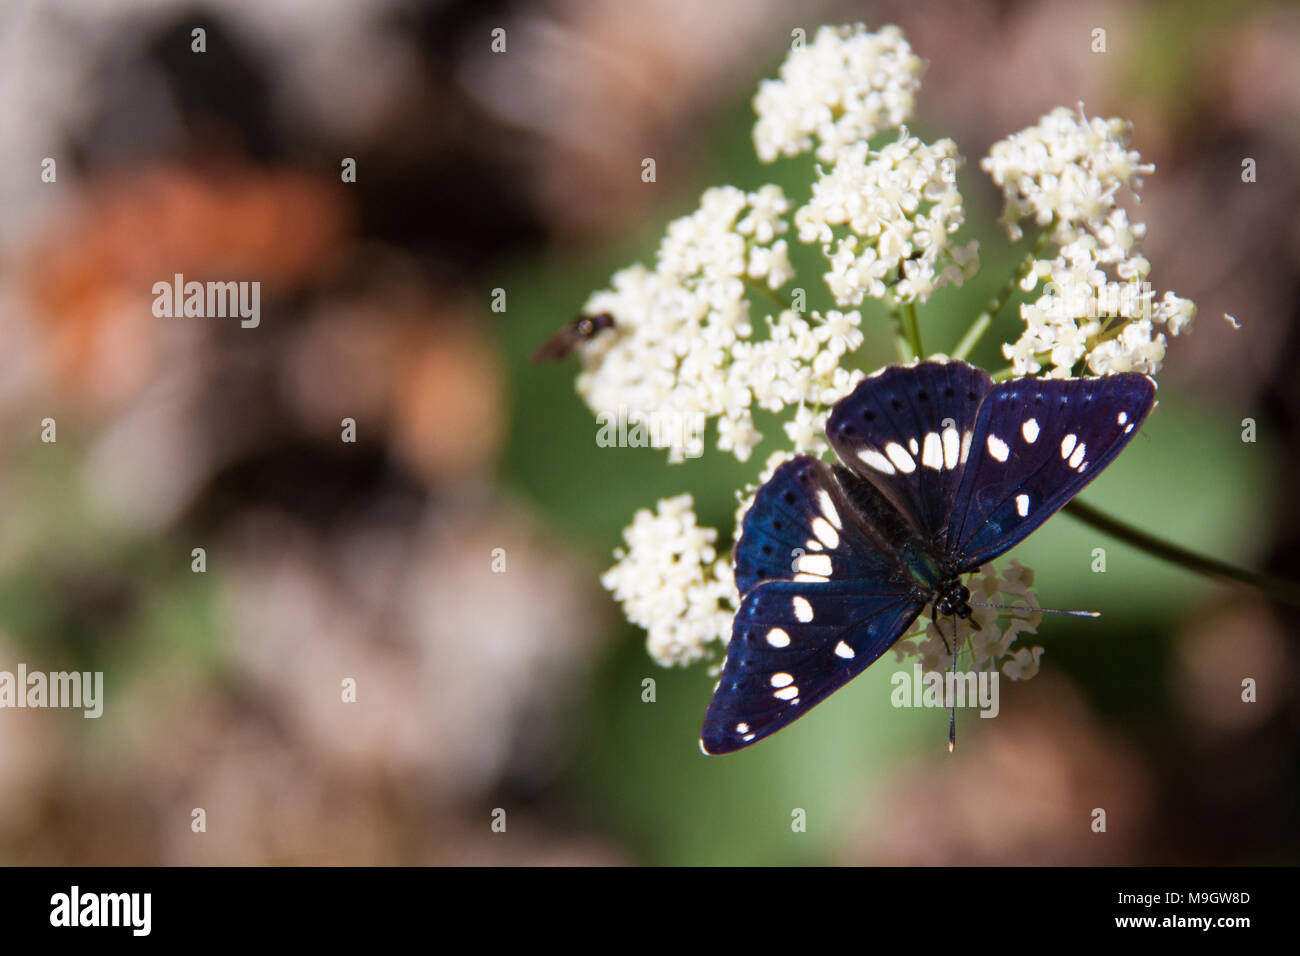 Bordered Patch Butterfly sitting on Flower, Hungary Stock Photo